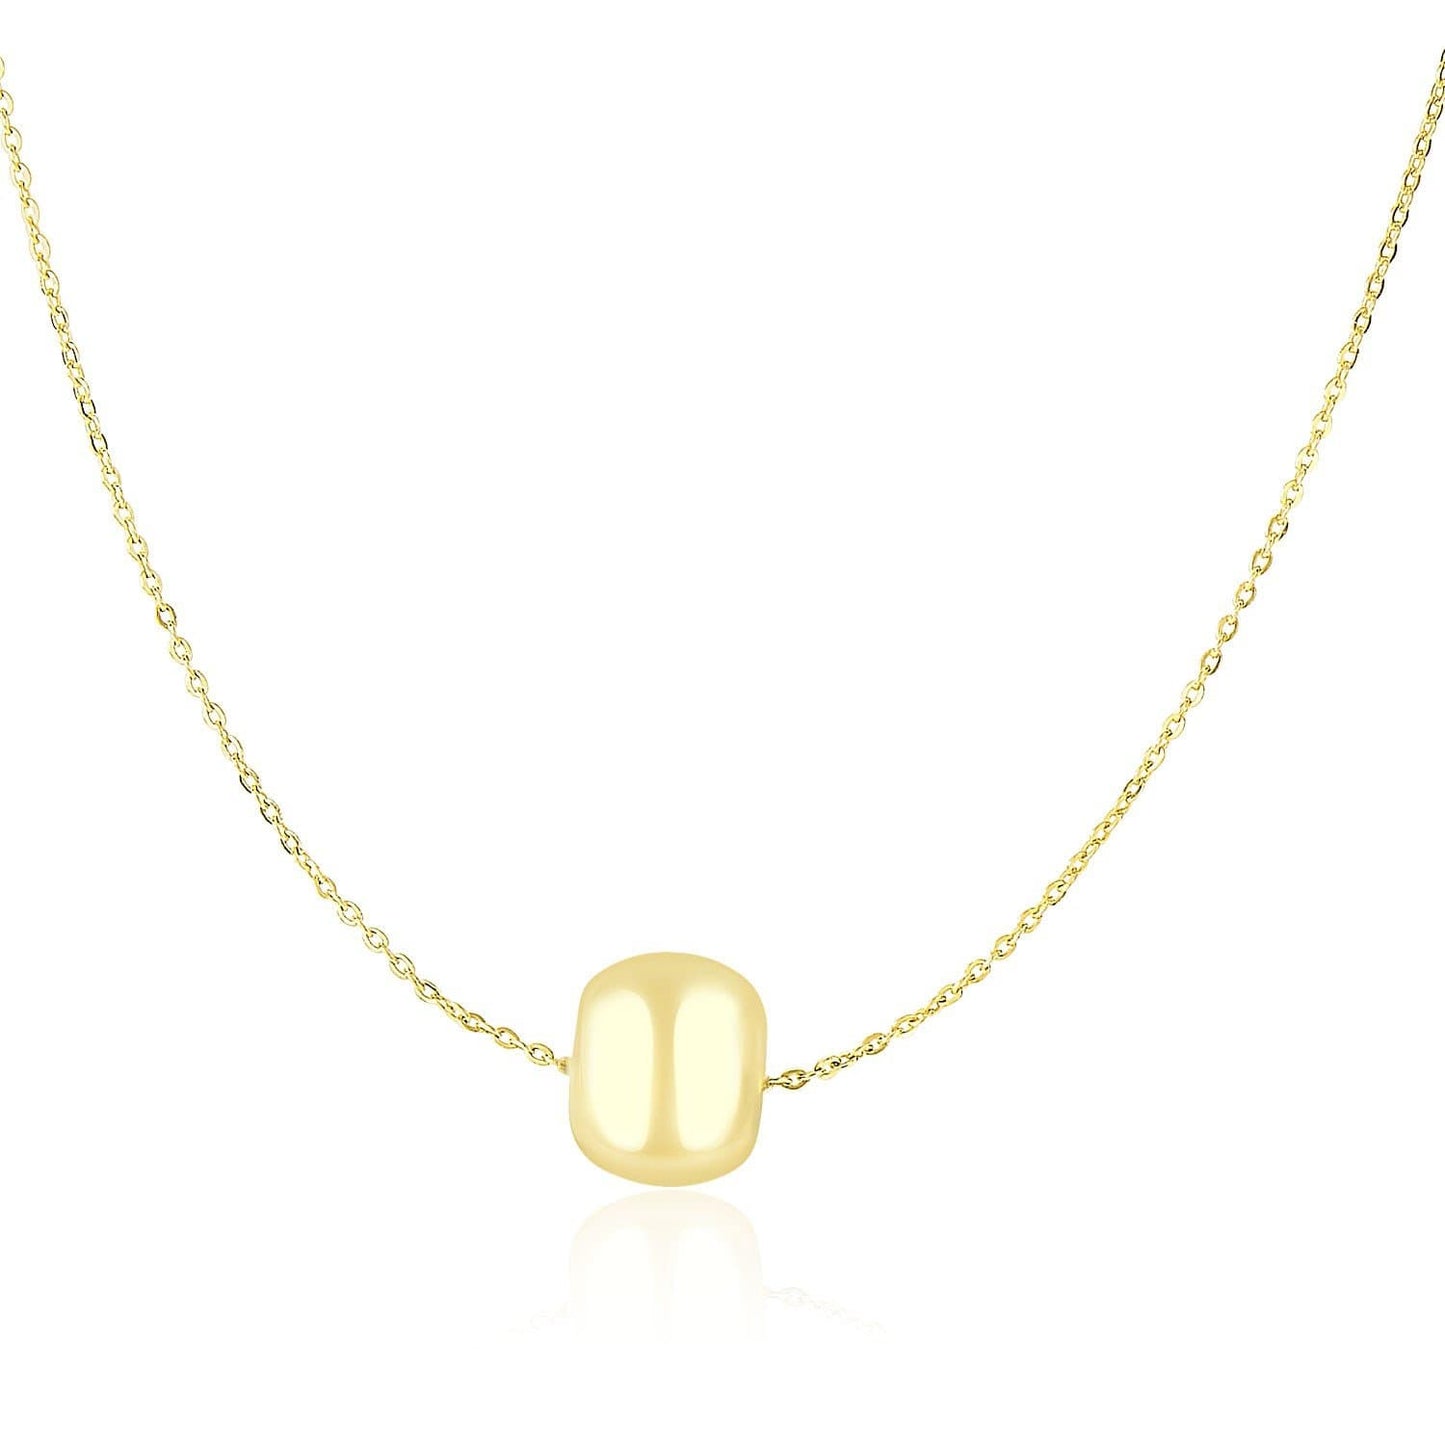 14k Yellow Gold Necklace with Shiny Barrel Bead Charm